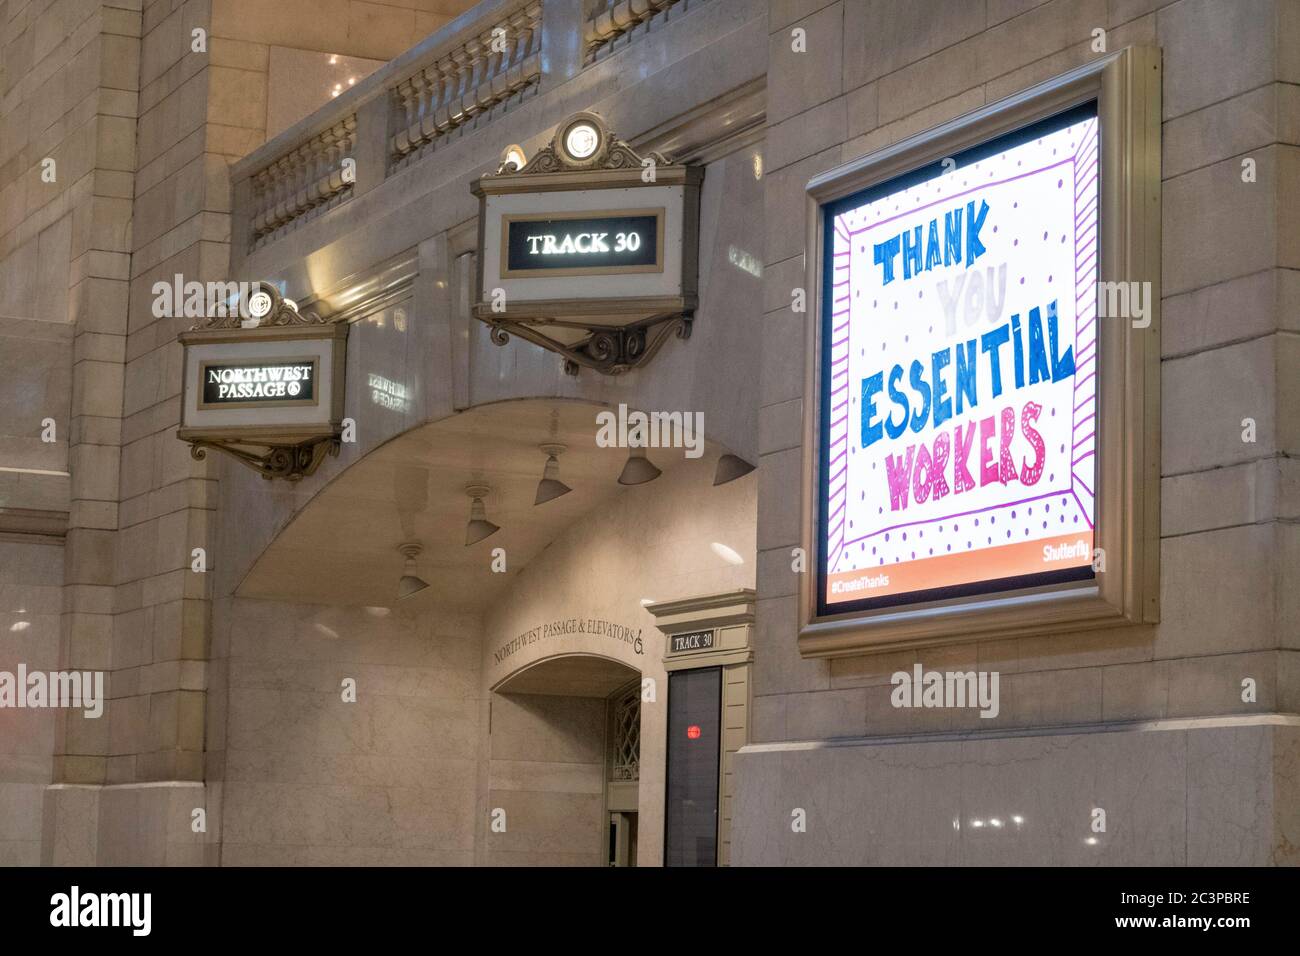 Signs in Grand Central Terminal thanking essential workers during coronavirus pandemic, New York City, USA Stock Photo